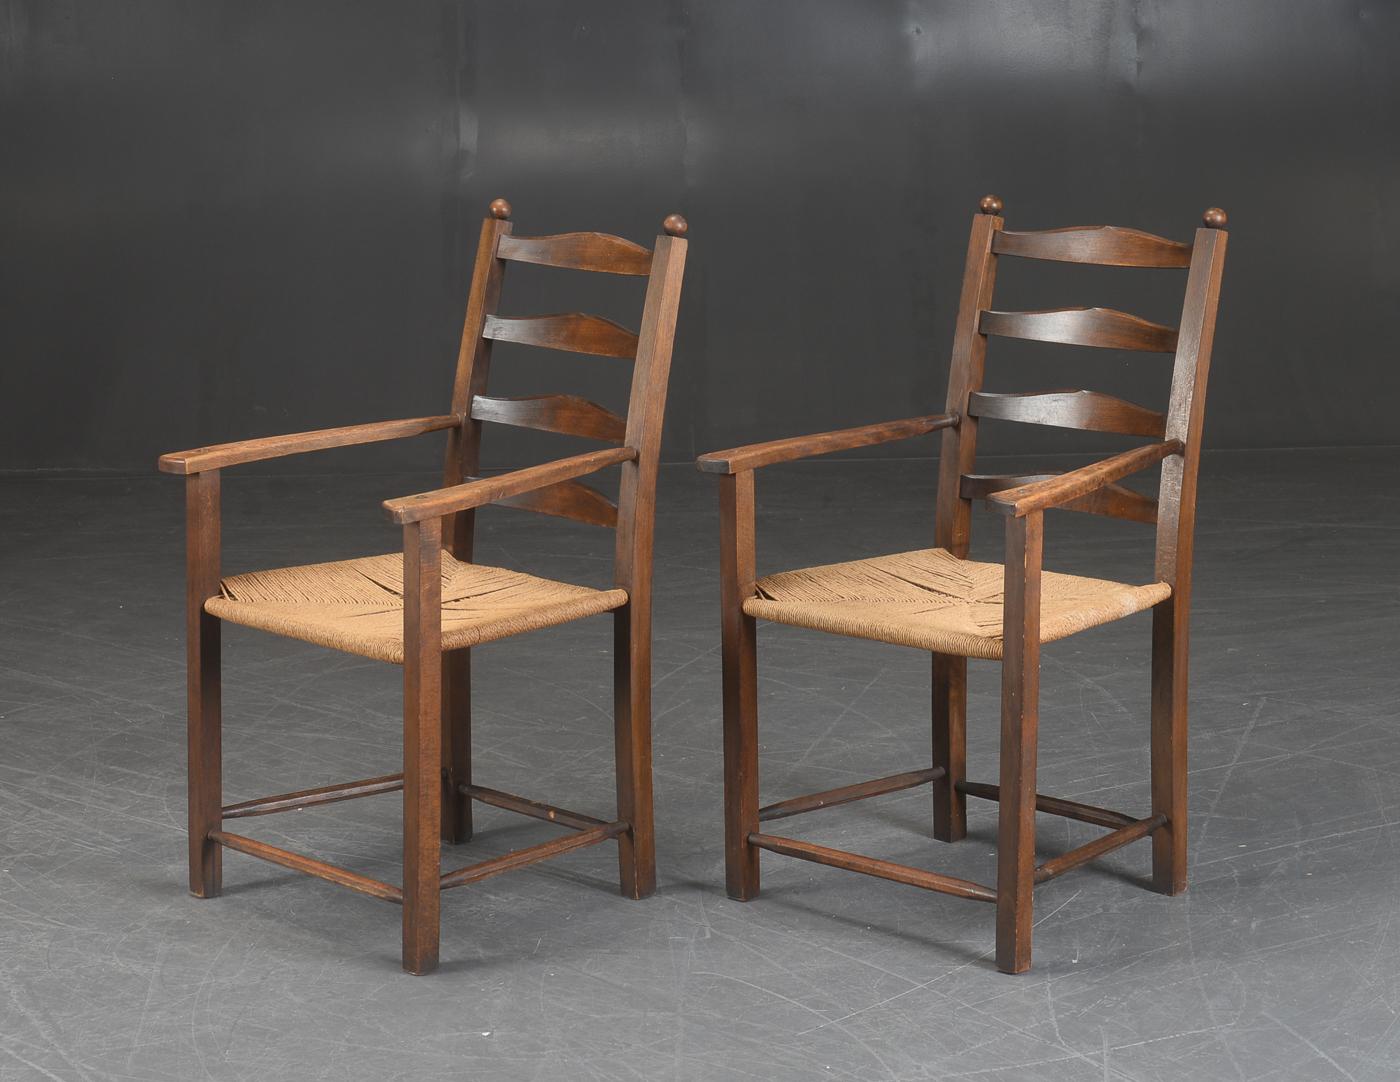 Great pair of country style armchairs made in Denmark in the early part of the 20th century. Hand carved from solid beech and stained. Over time the chairs have achieved an absolutely remarkable patina. The wood is in overall good solid condition as